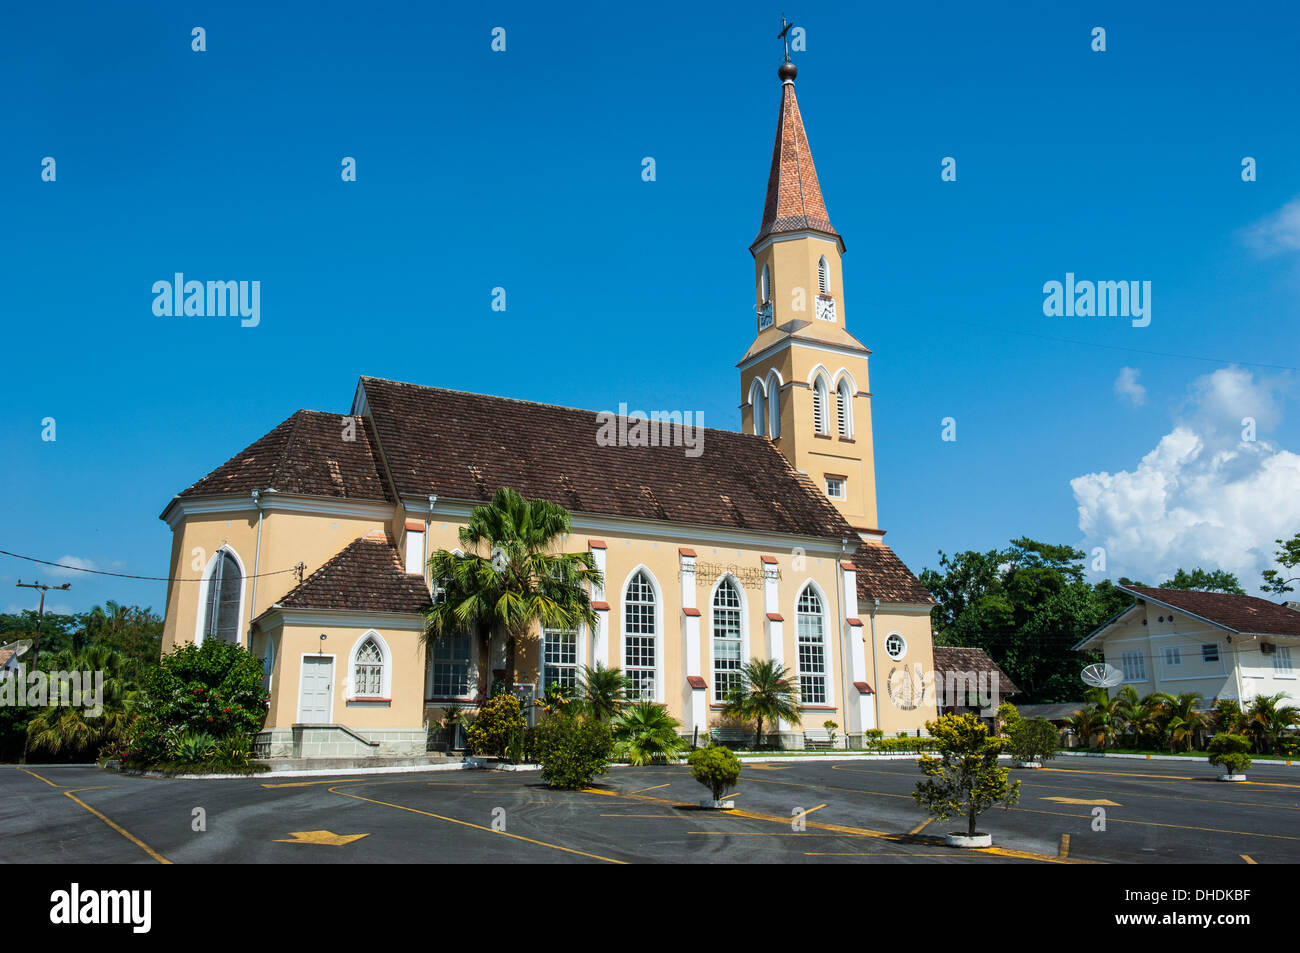 Lutheran church in the German speaking town of Pomerode, Brazil Stock Photo